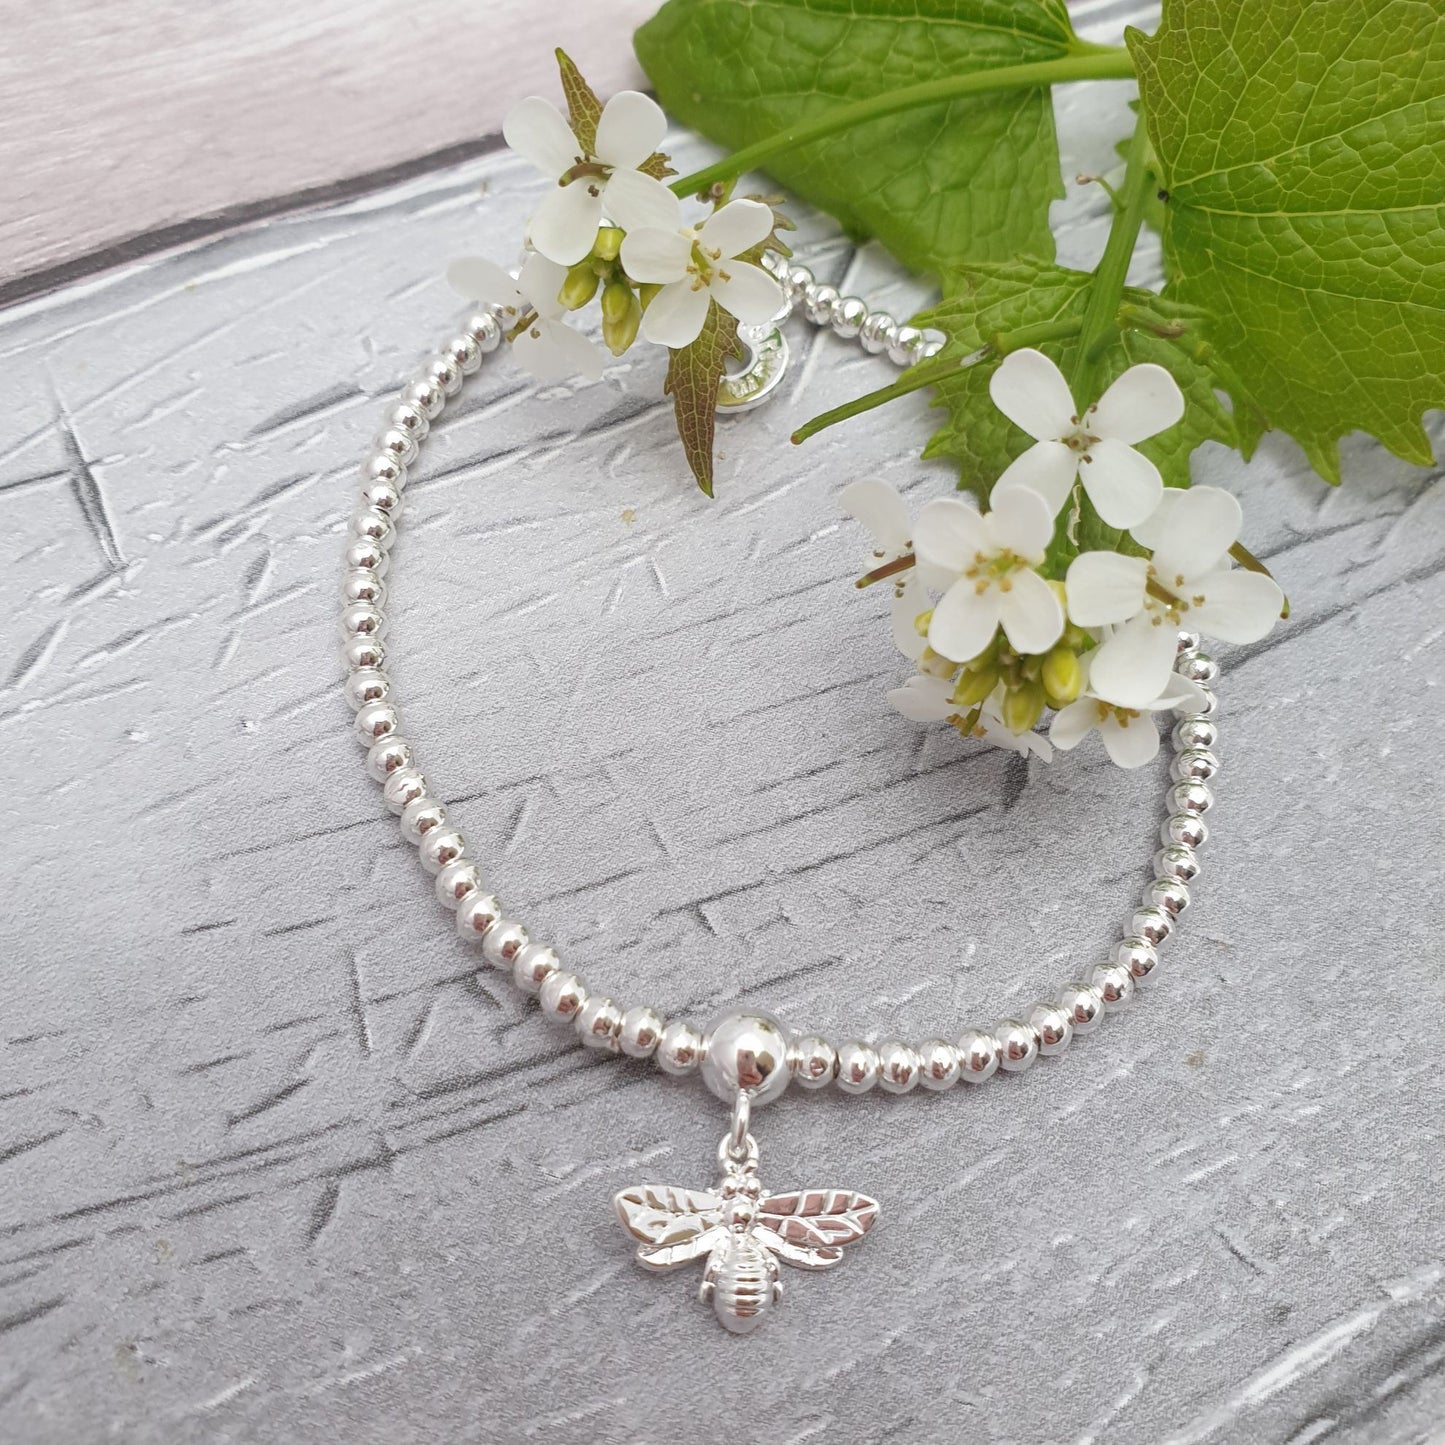 Photo of a Silver Plated Bracelet with a Silver Bumble Bee Charm